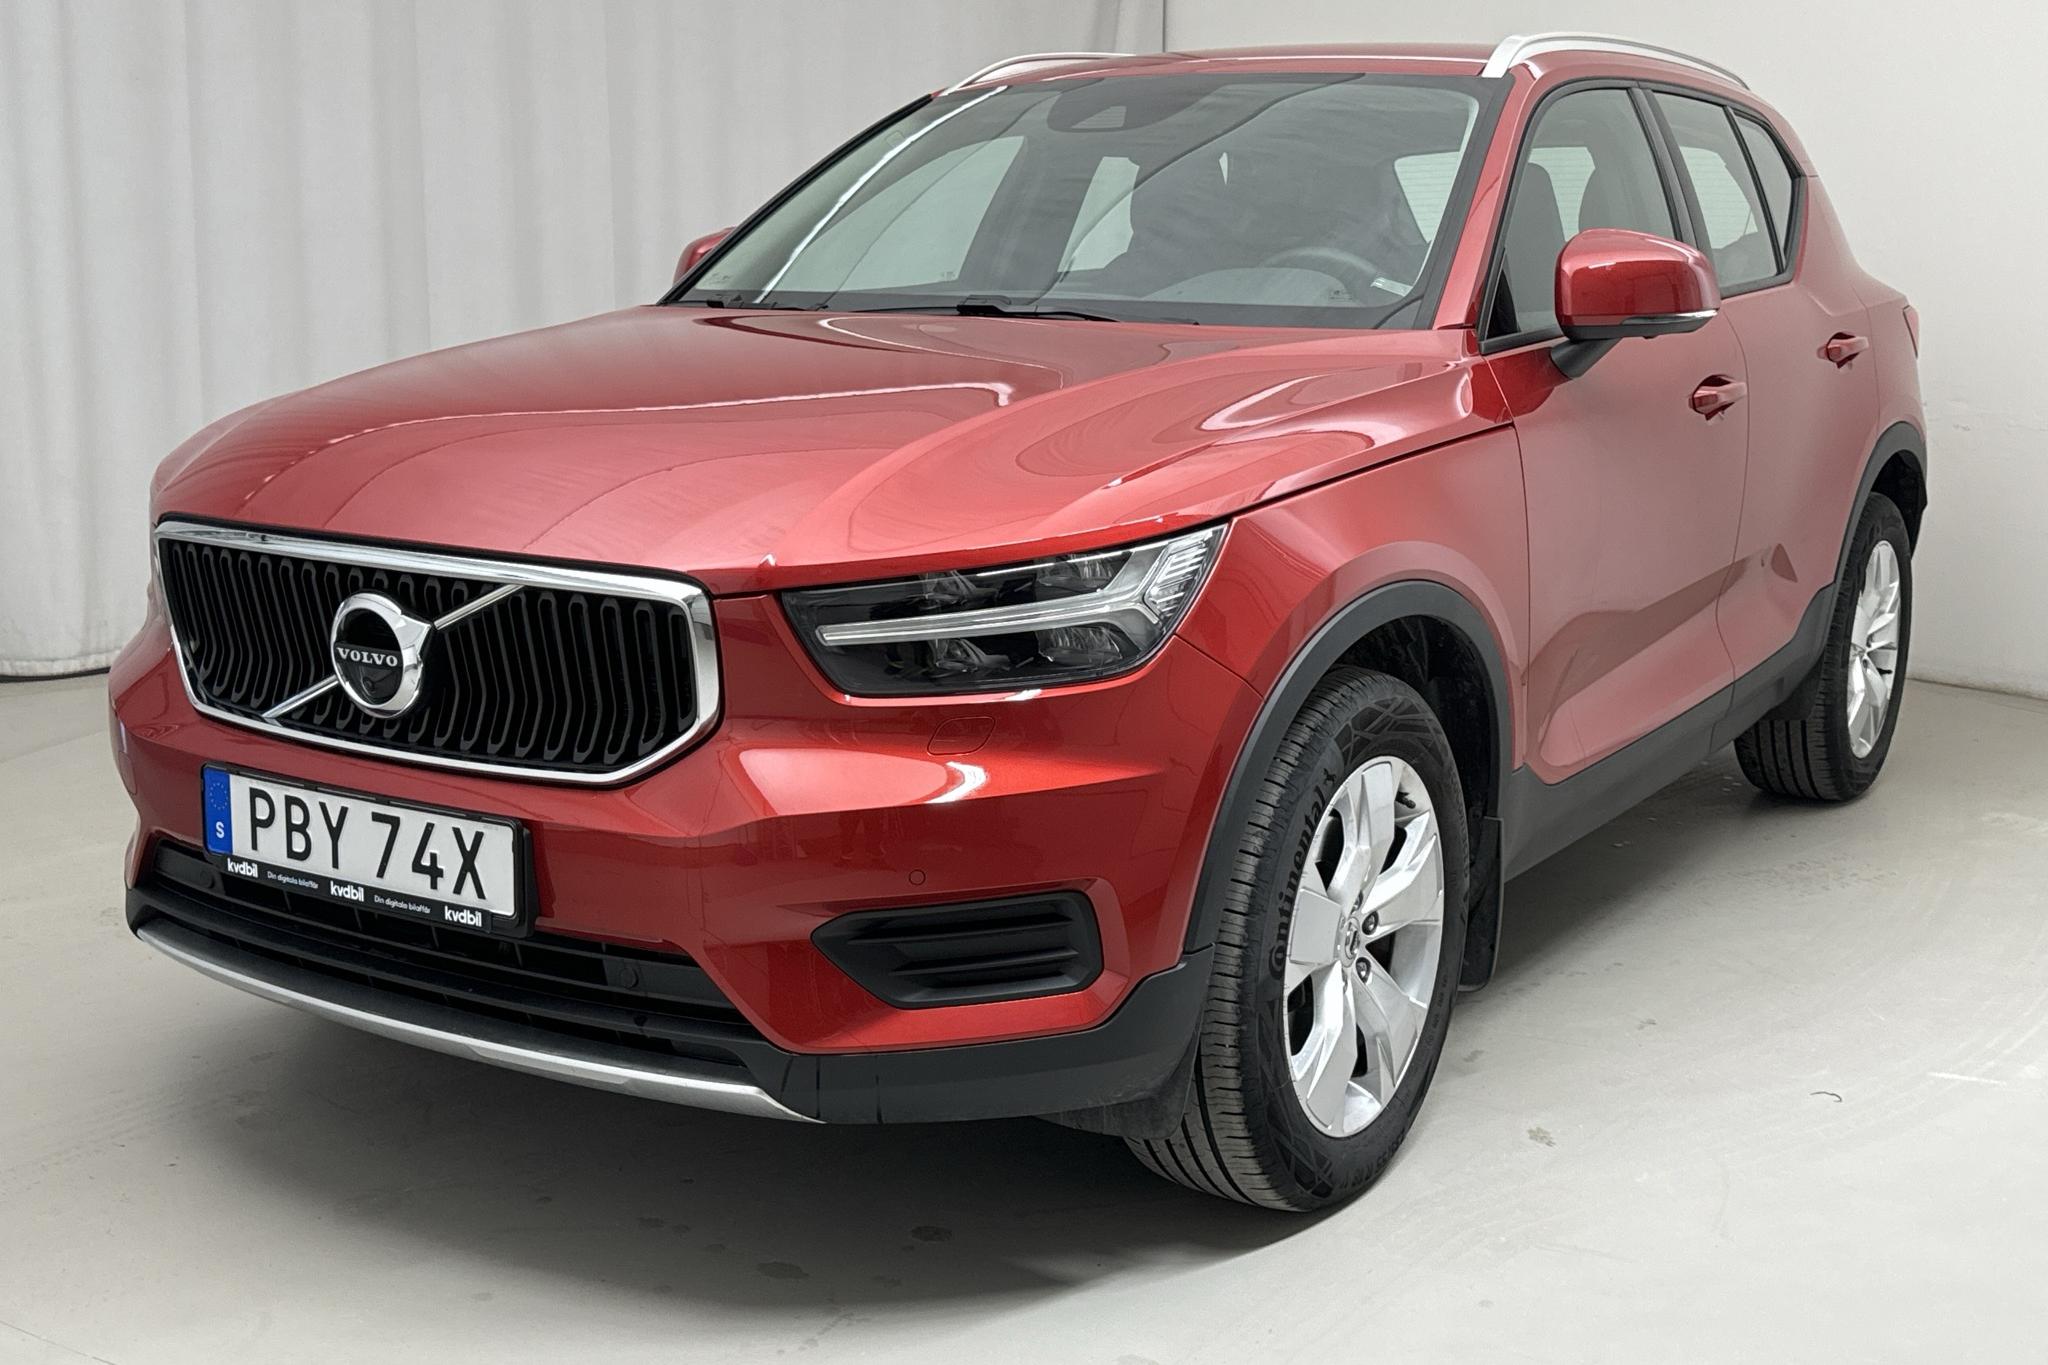 Volvo XC40 T4 2WD (190hk) - 17 580 km - Automatic - red - 2020